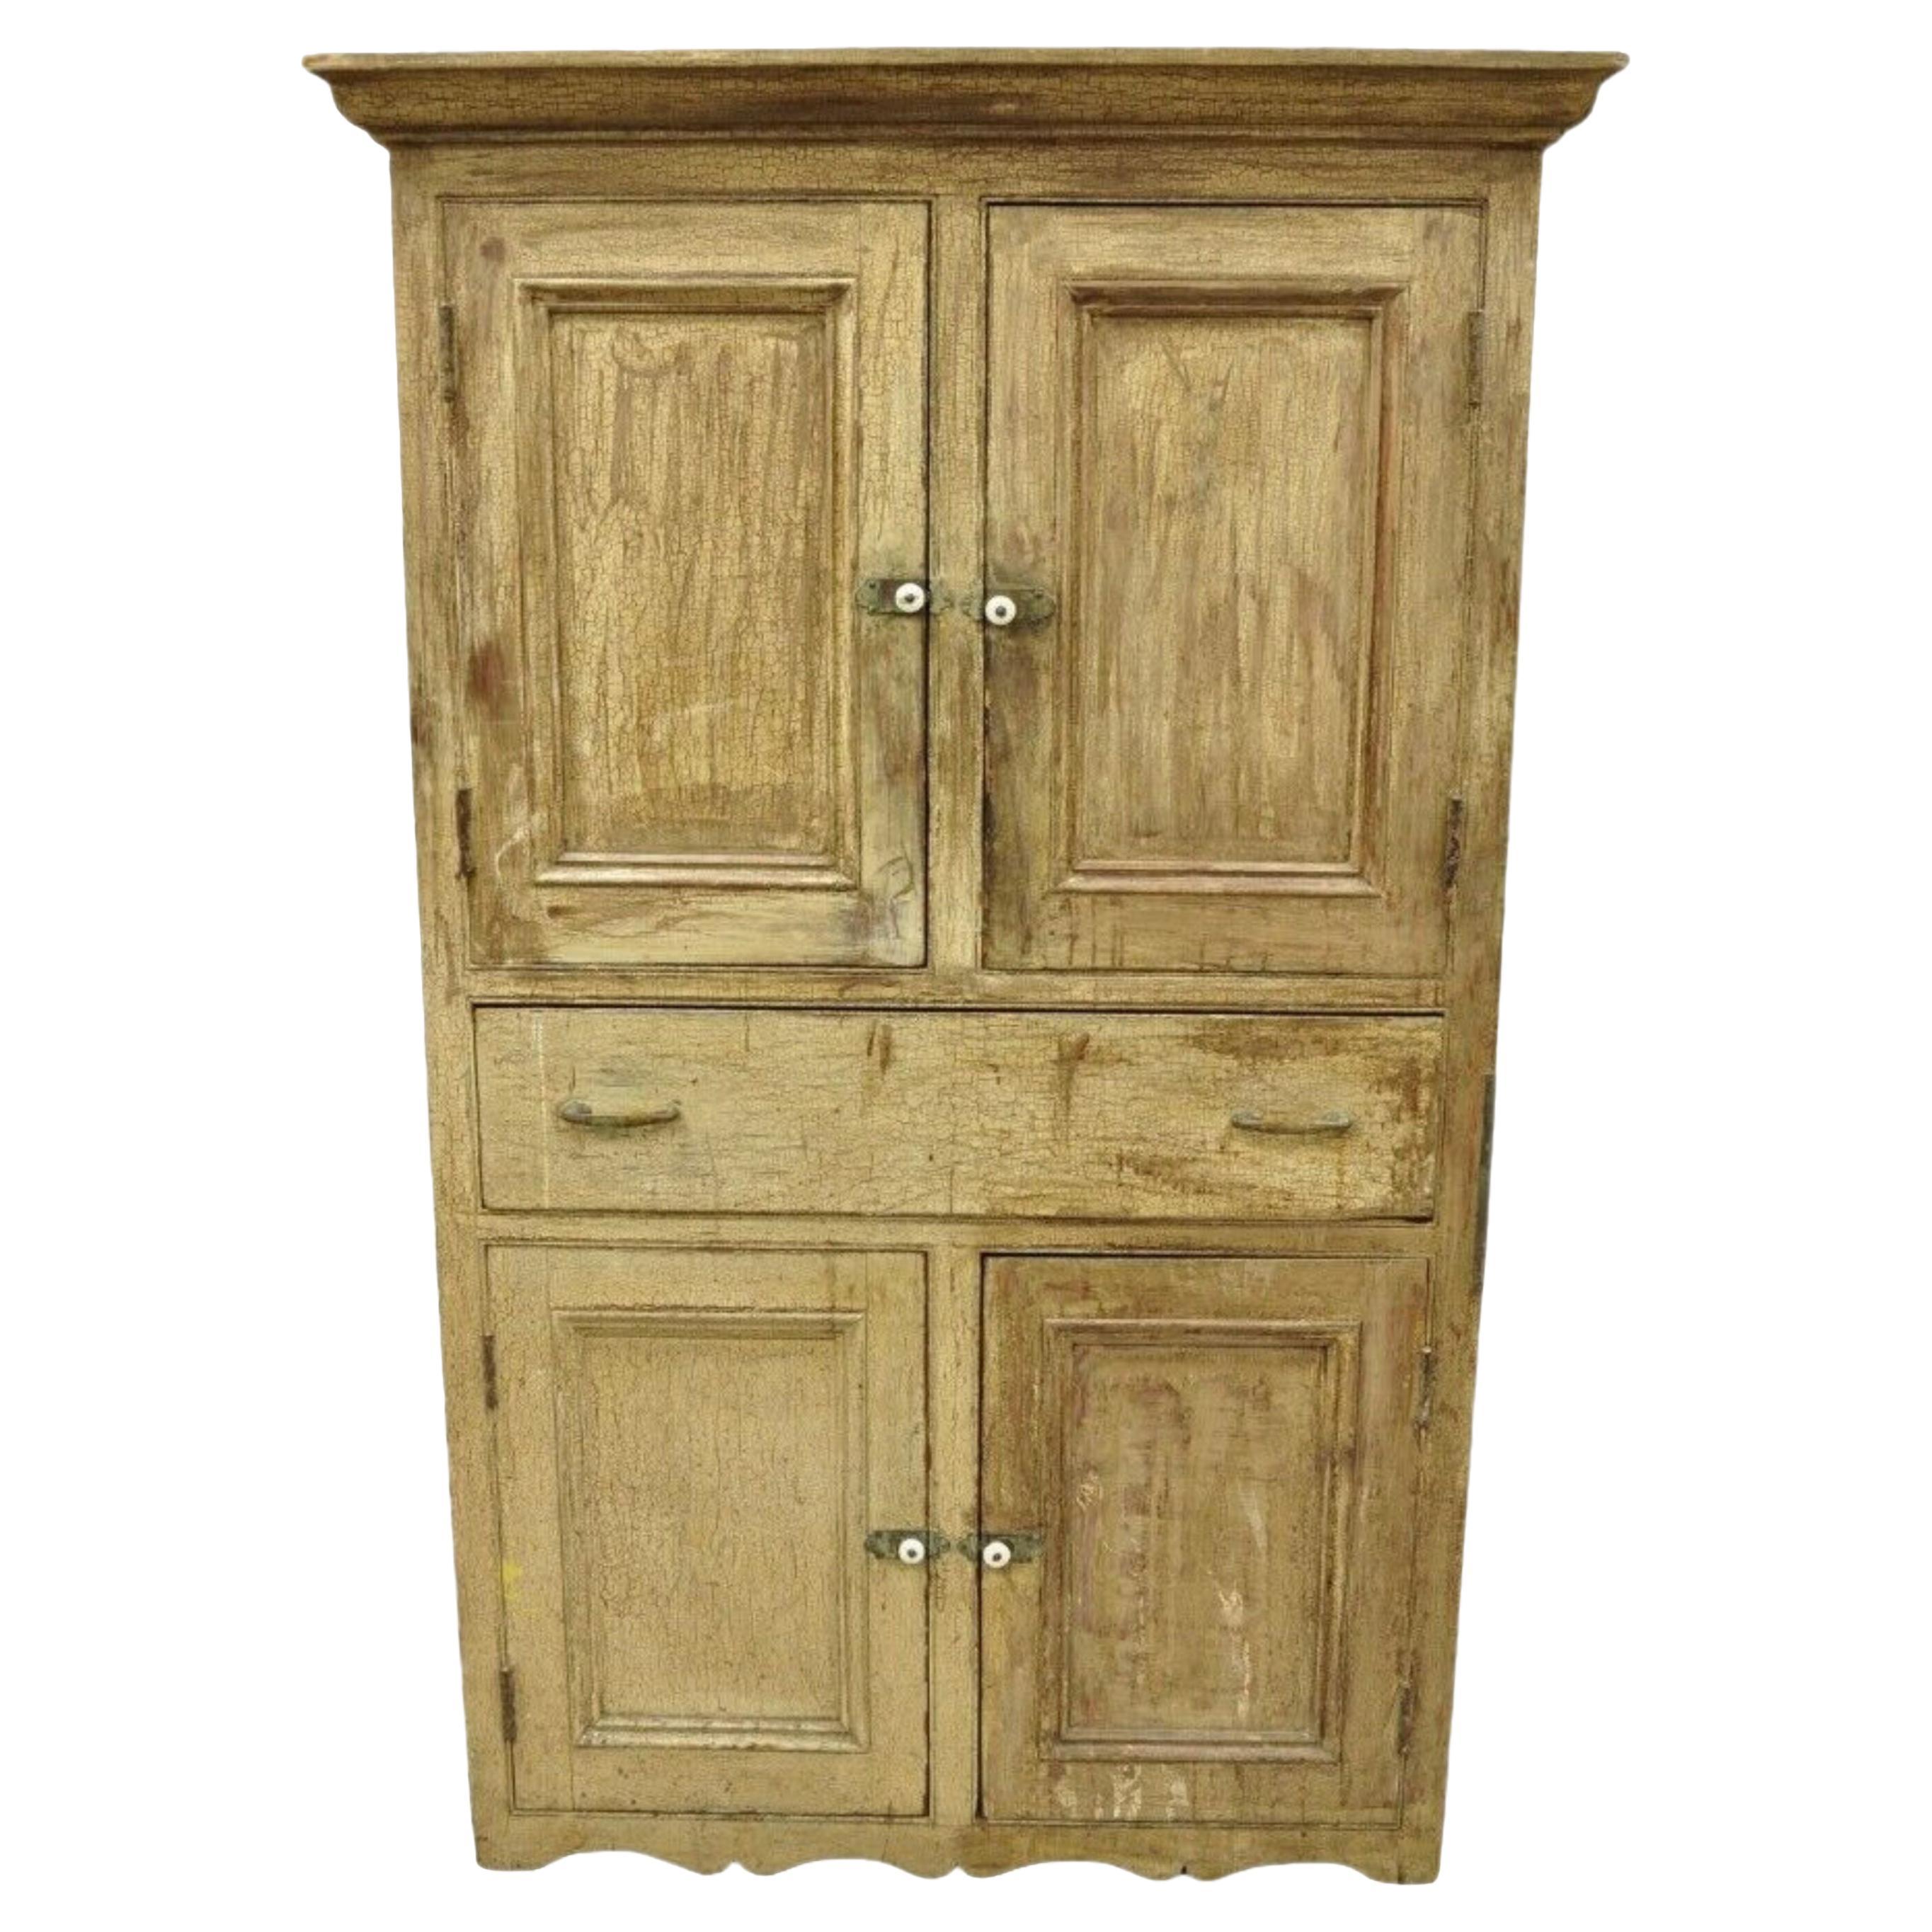 What is a hutch cabinet?